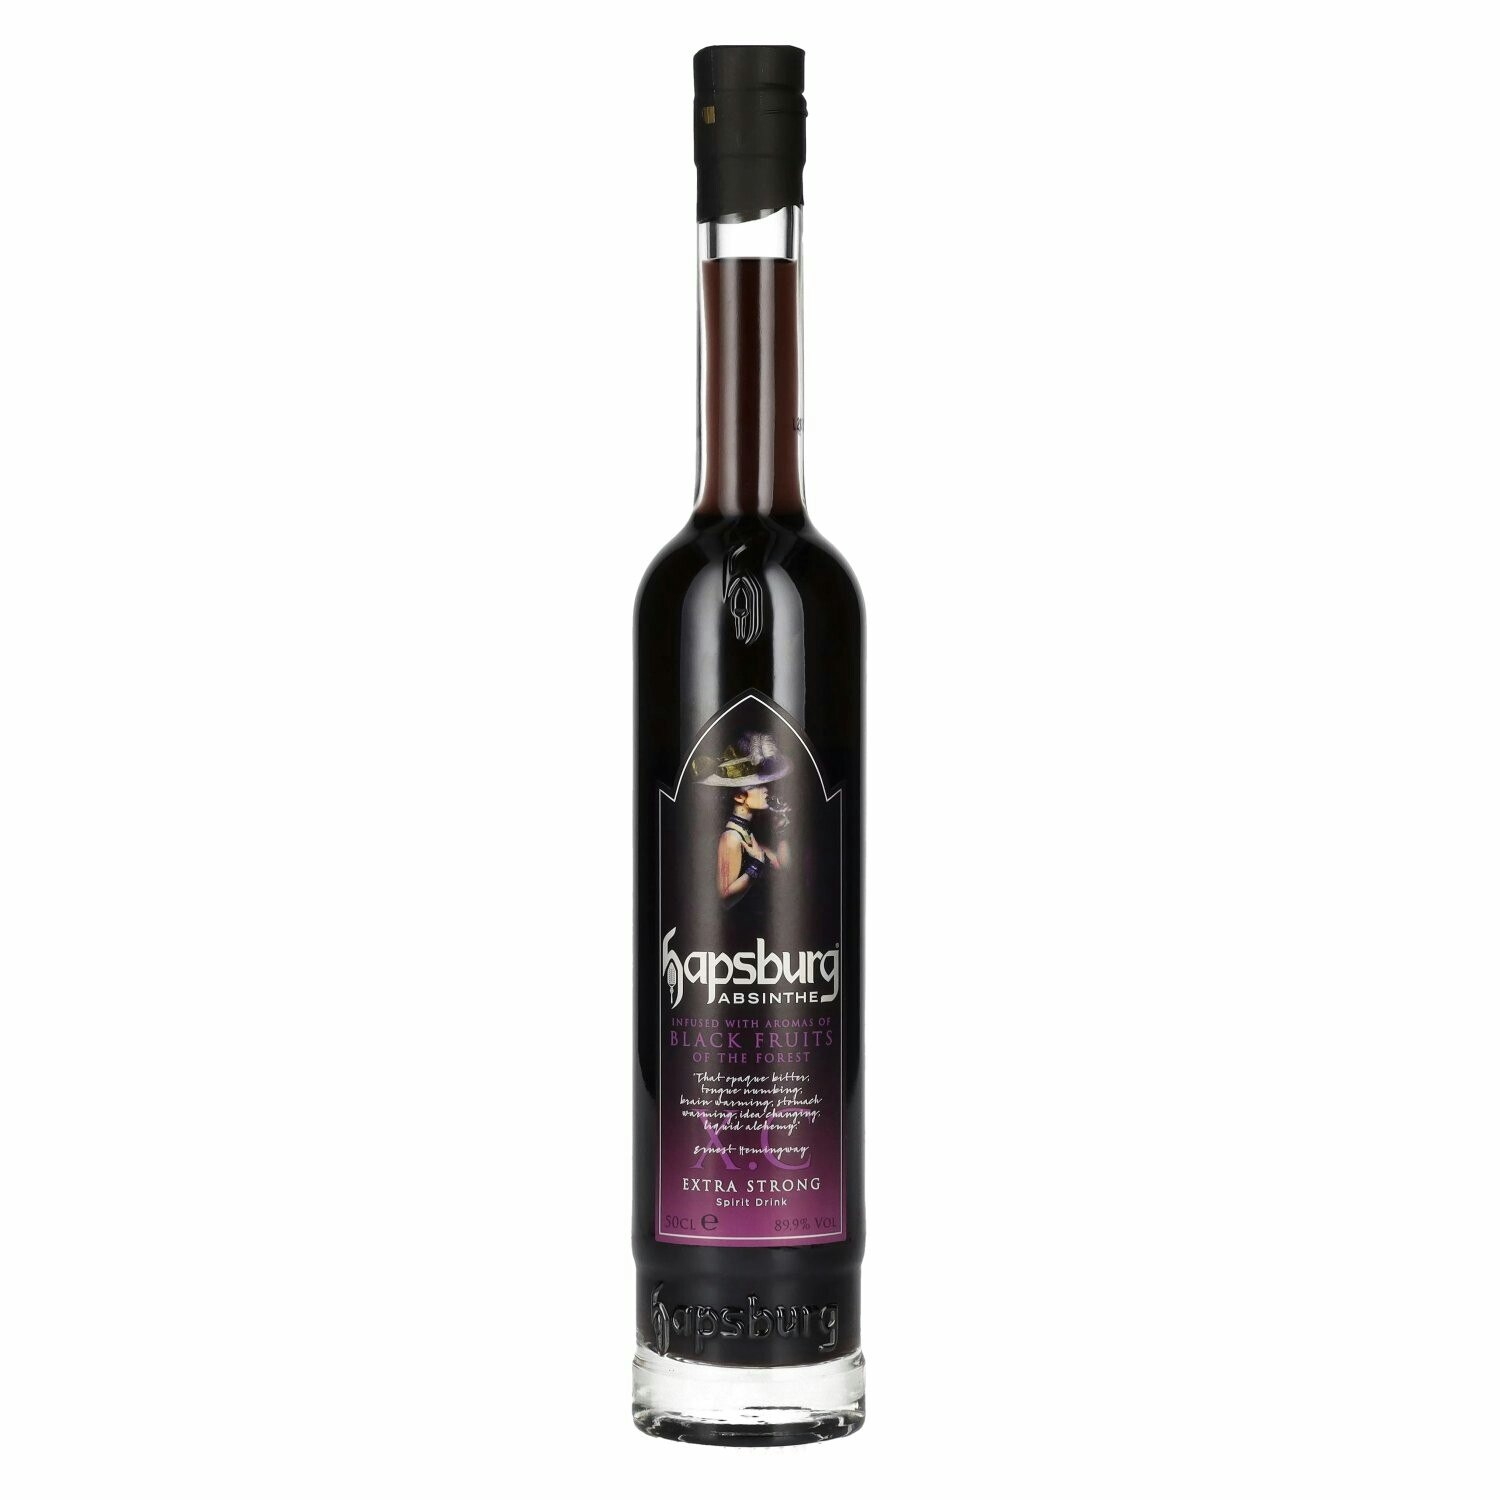 Hapsburg Absinthe X.C EXTRA STRONG Black Fruits of the Forest 89,9% Vol. 0,5l